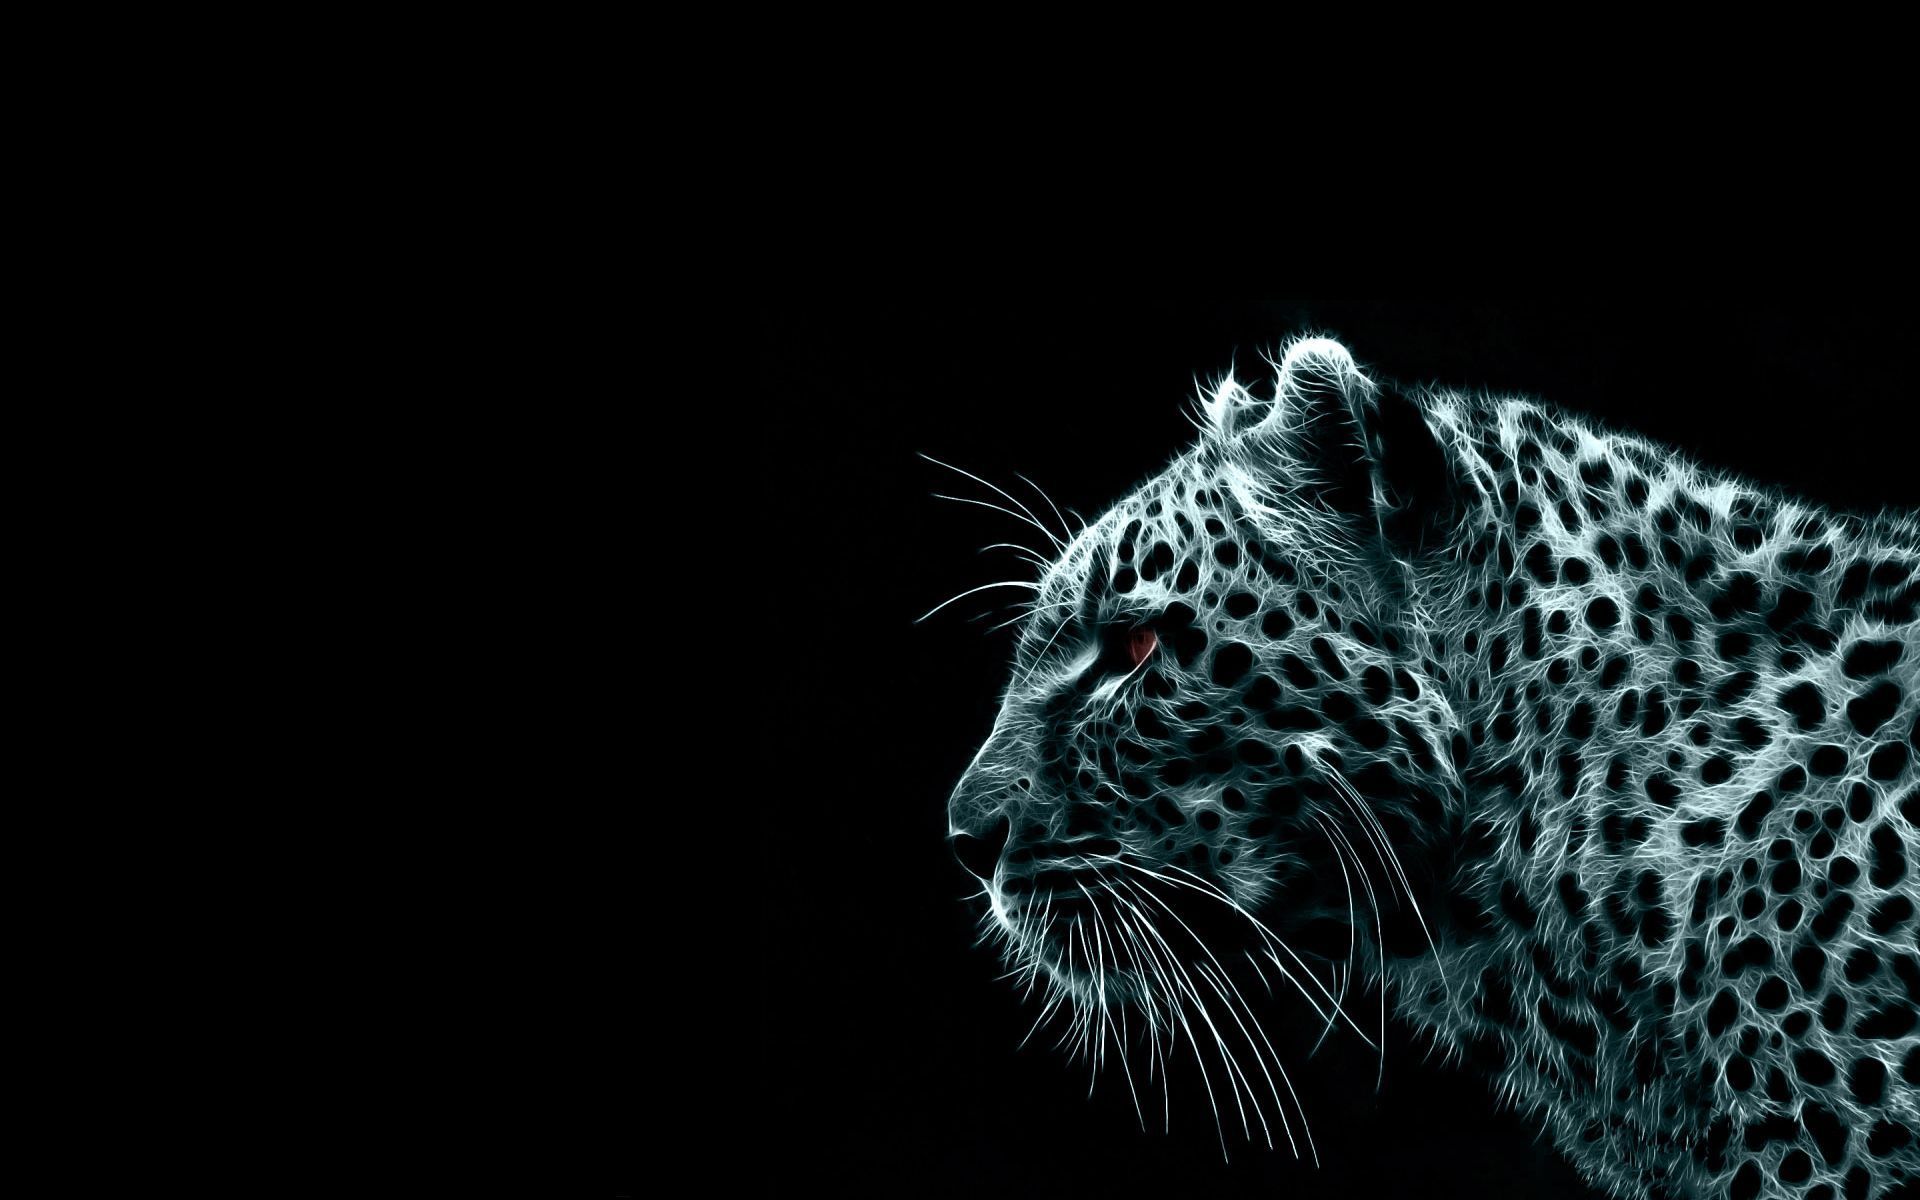 1060 Tiger HD Wallpapers | Backgrounds - Wallpaper Abyss